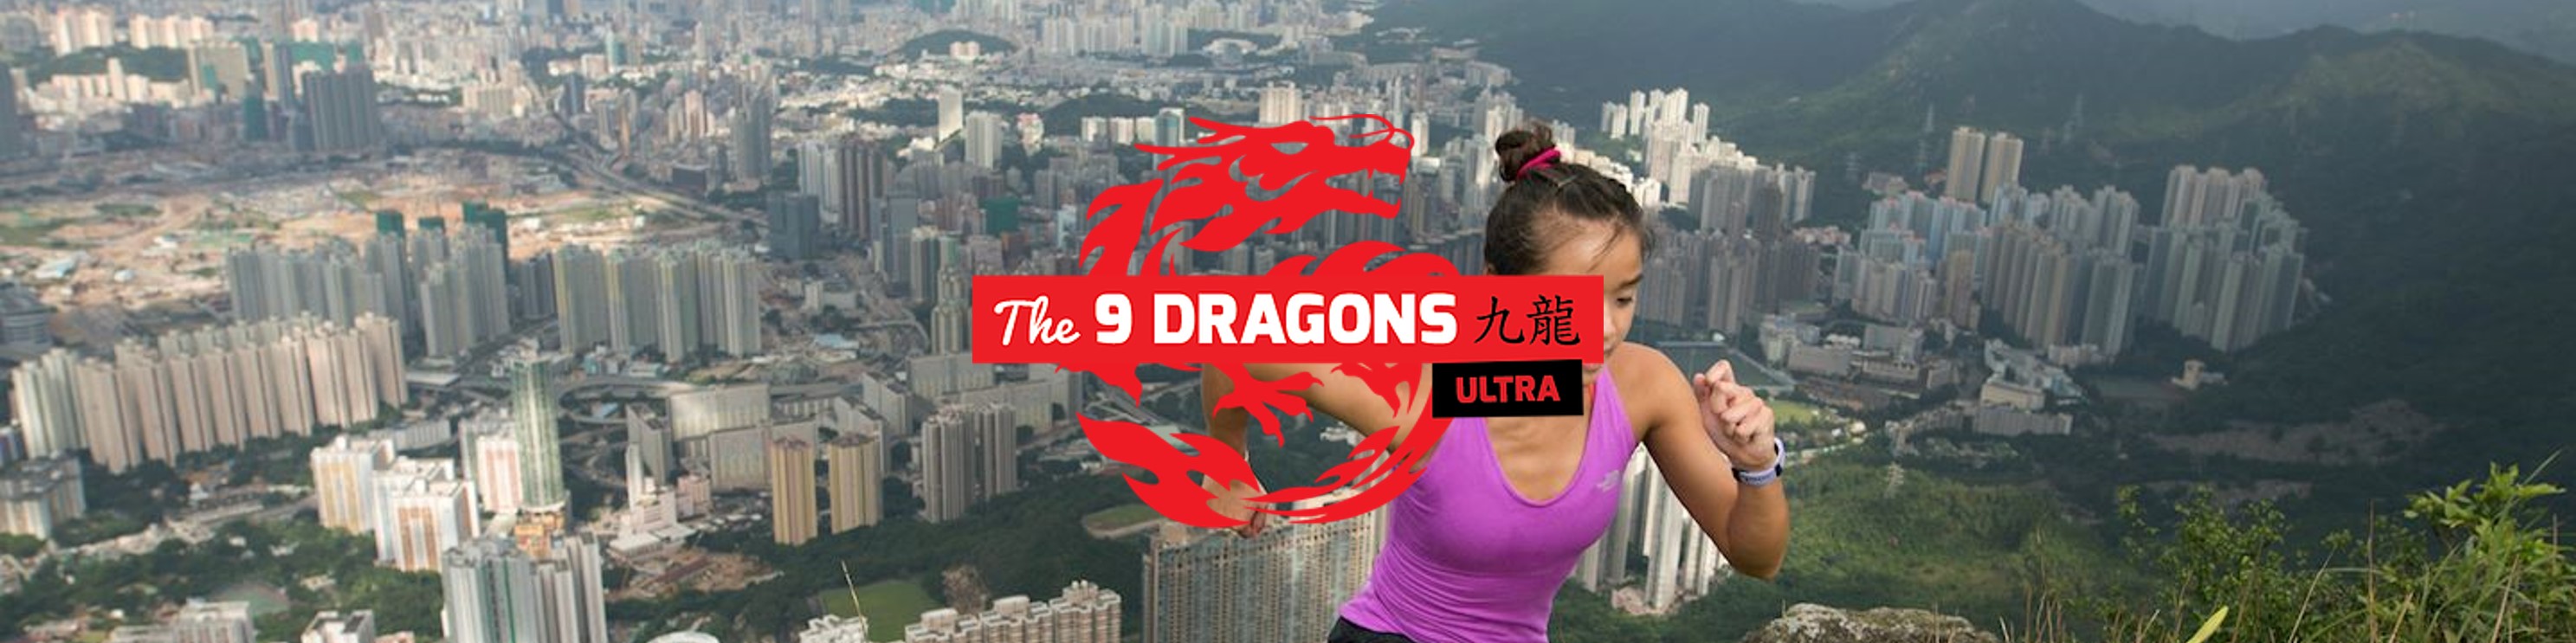 The 9 Dragons Ultra 2019